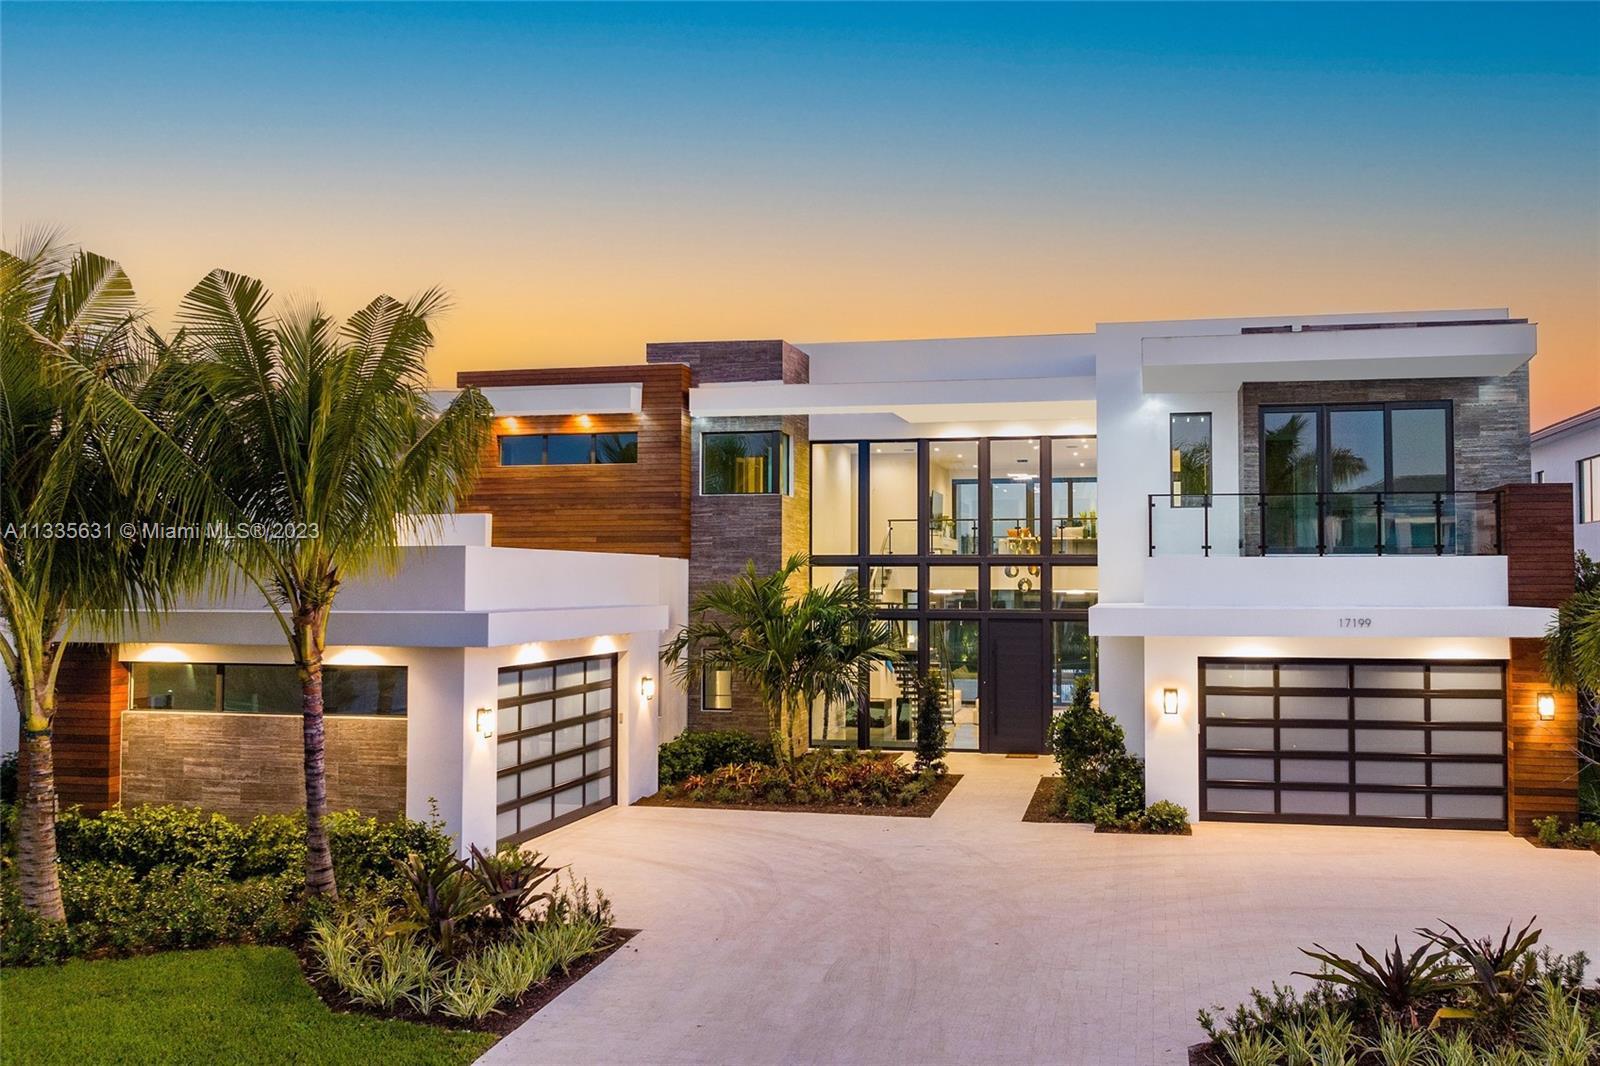 Tucked behind one of Boca Raton’s most sought after communities, Boca Bridges Estates, discover this